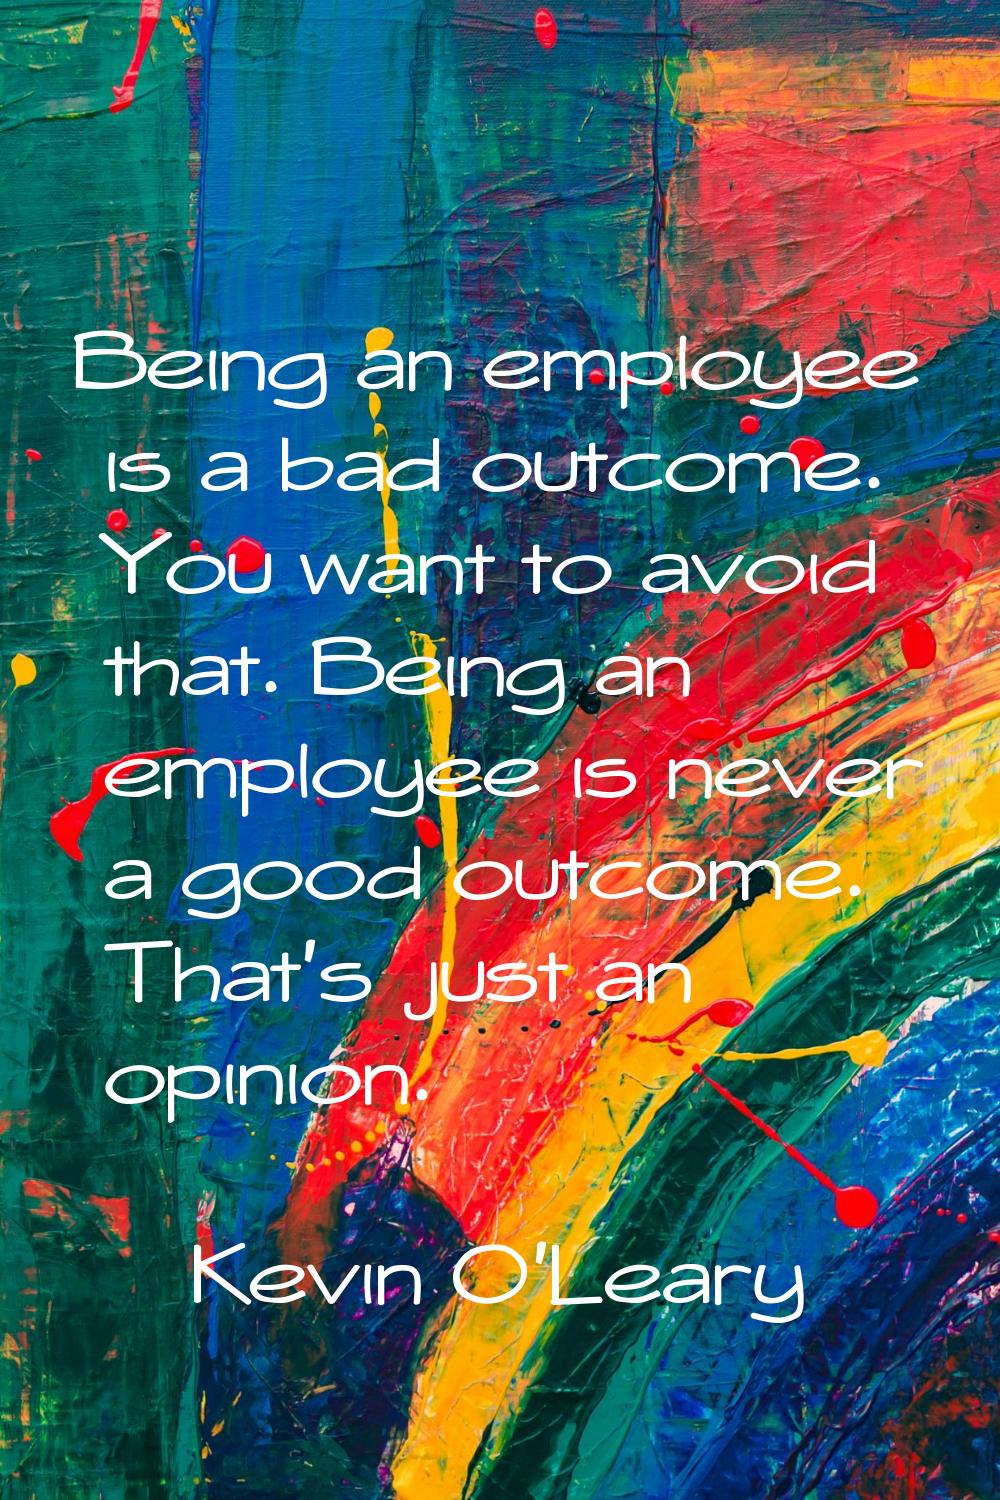 Being an employee is a bad outcome. You want to avoid that. Being an employee is never a good outco